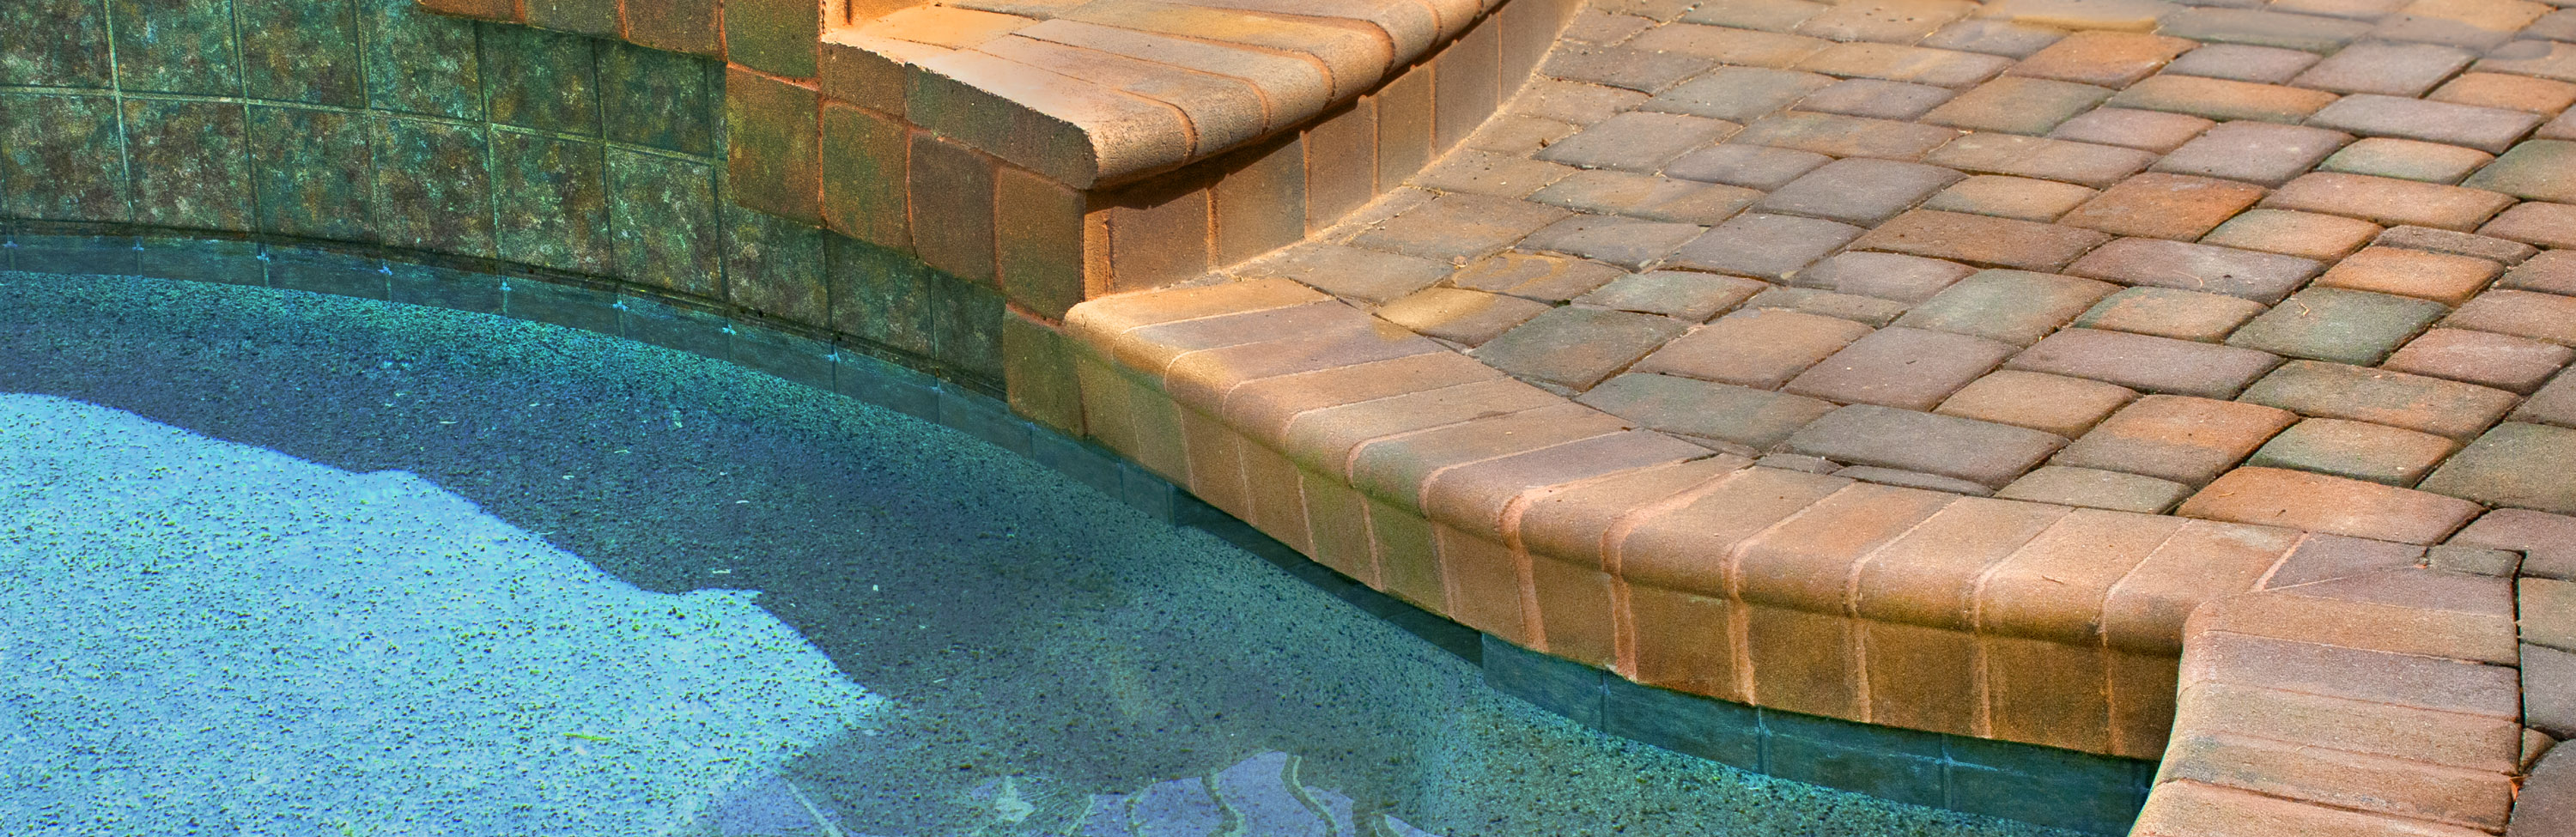 Photograph of Phoenix Paver's Veneer Pavers installed as a multi level pool surround Pool Coping pavers used as steps and pool edge..